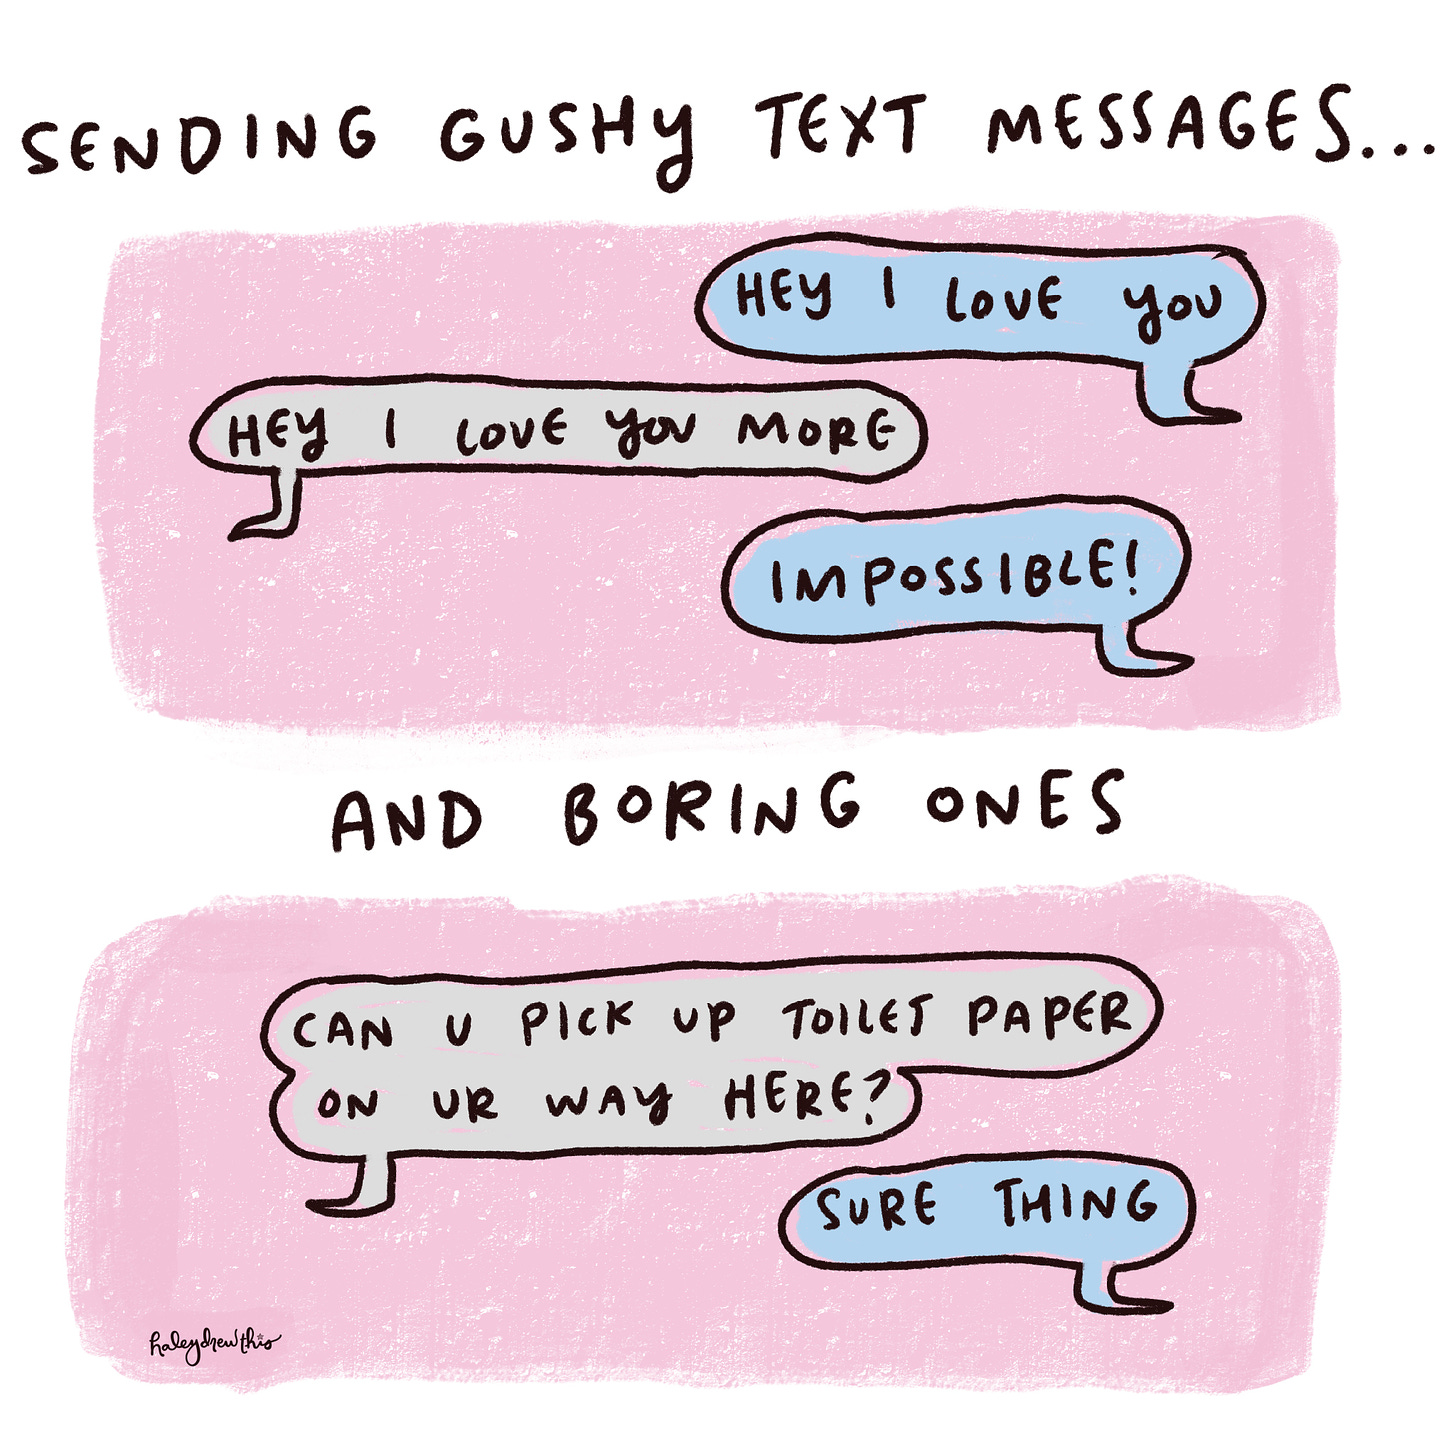 Sending gushy text messages and boring ones